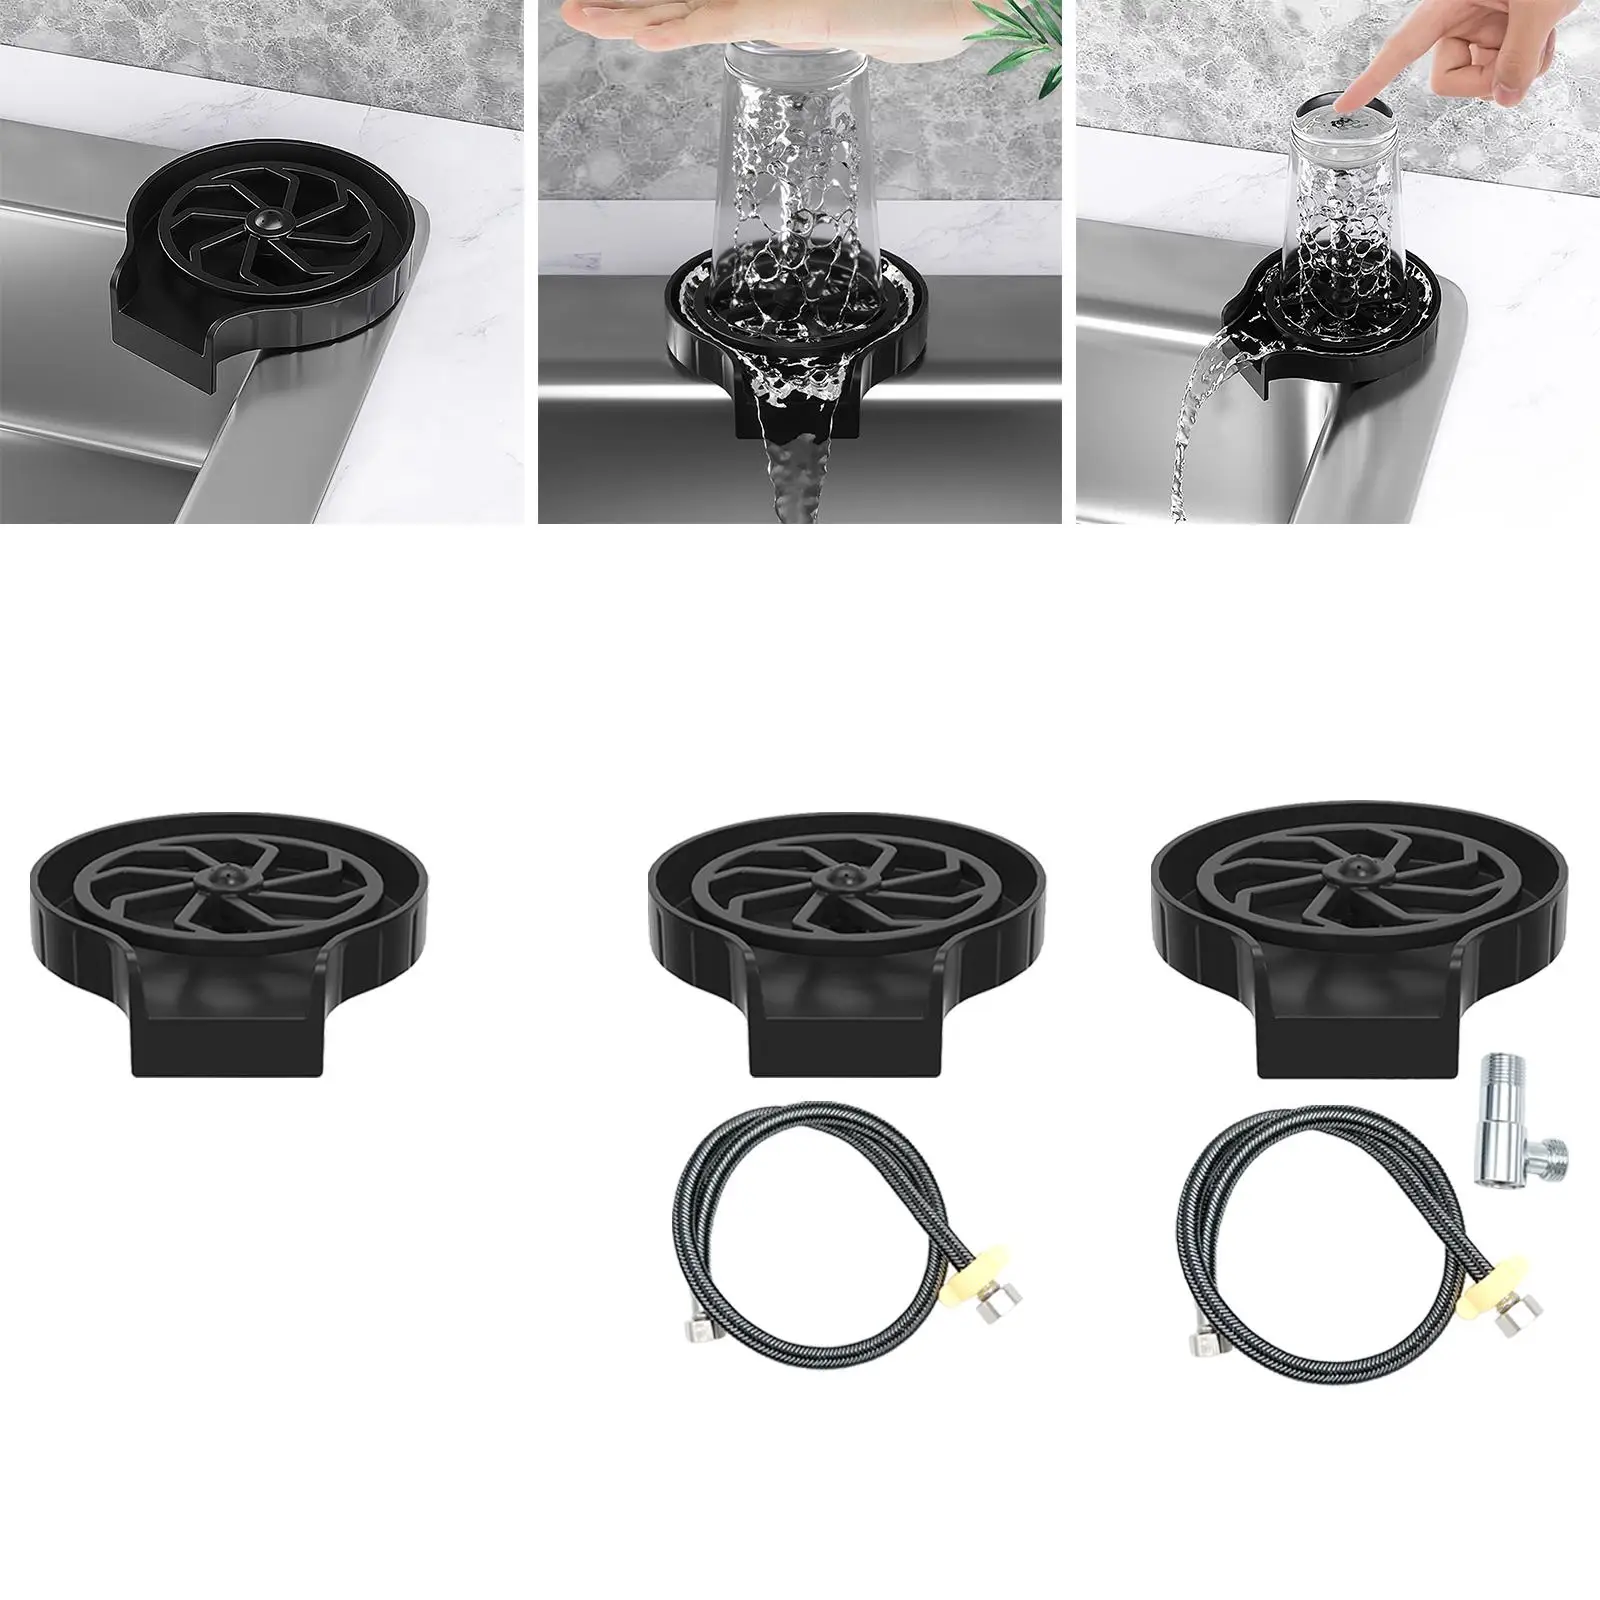 Faucet ,Kitchen Sink Attachment,Coffee  Wash , Cleaner,Cup Washer,Bar  for Restaurant